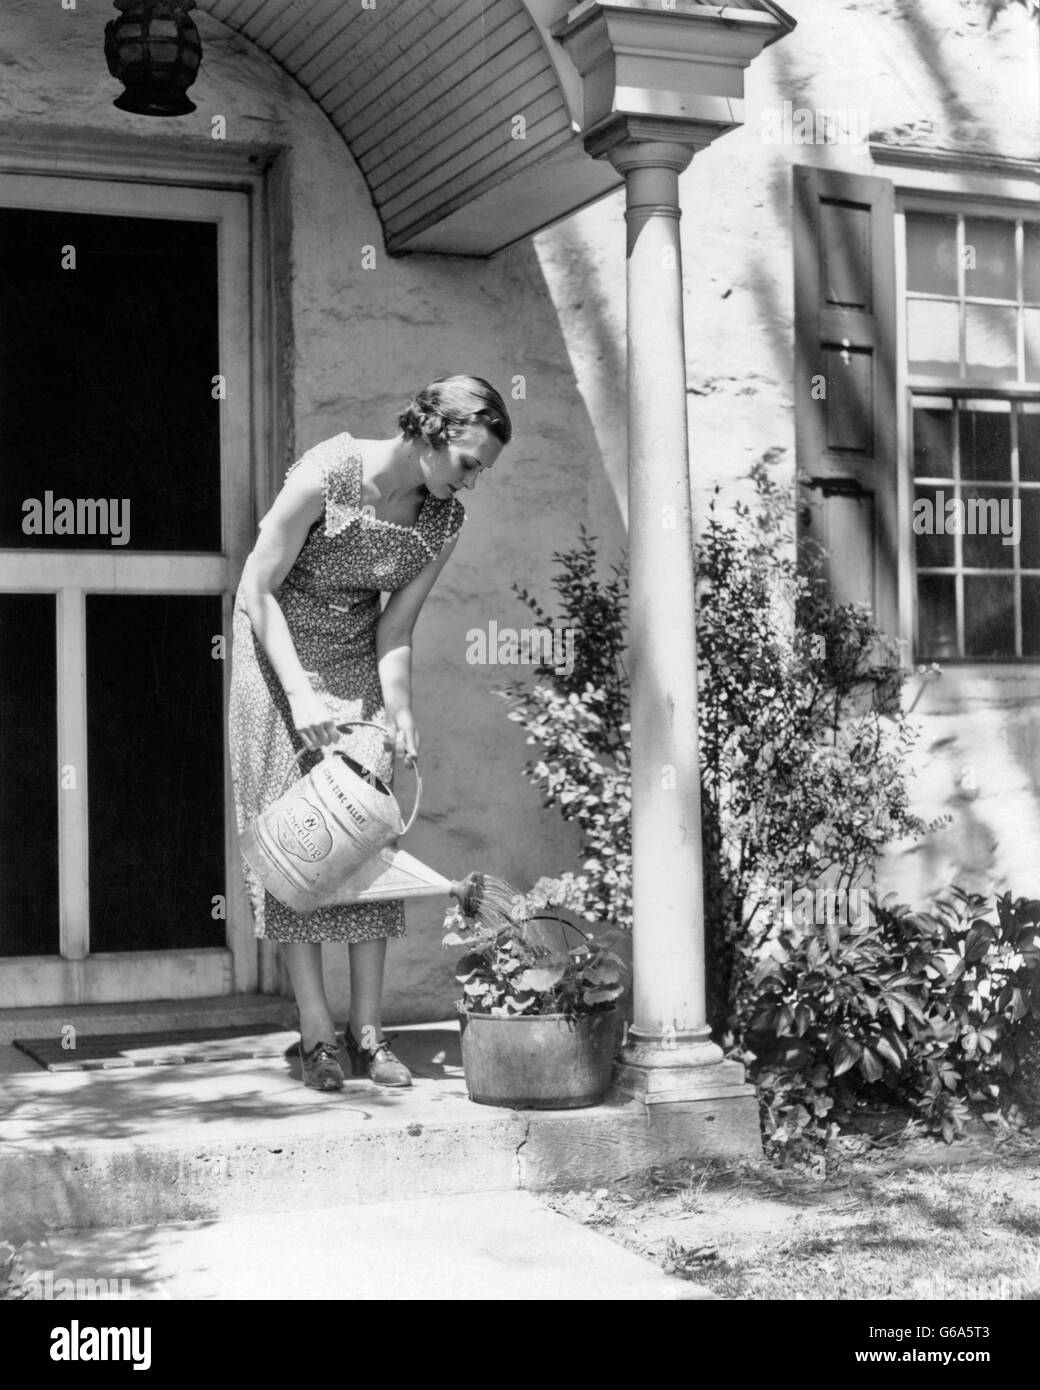 1930s WOMAN WEARING PRINT DRESS WATERING POTTED PLANT WITH WATERING CAN ON FRONT STOOP OF HOUSE Stock Photo